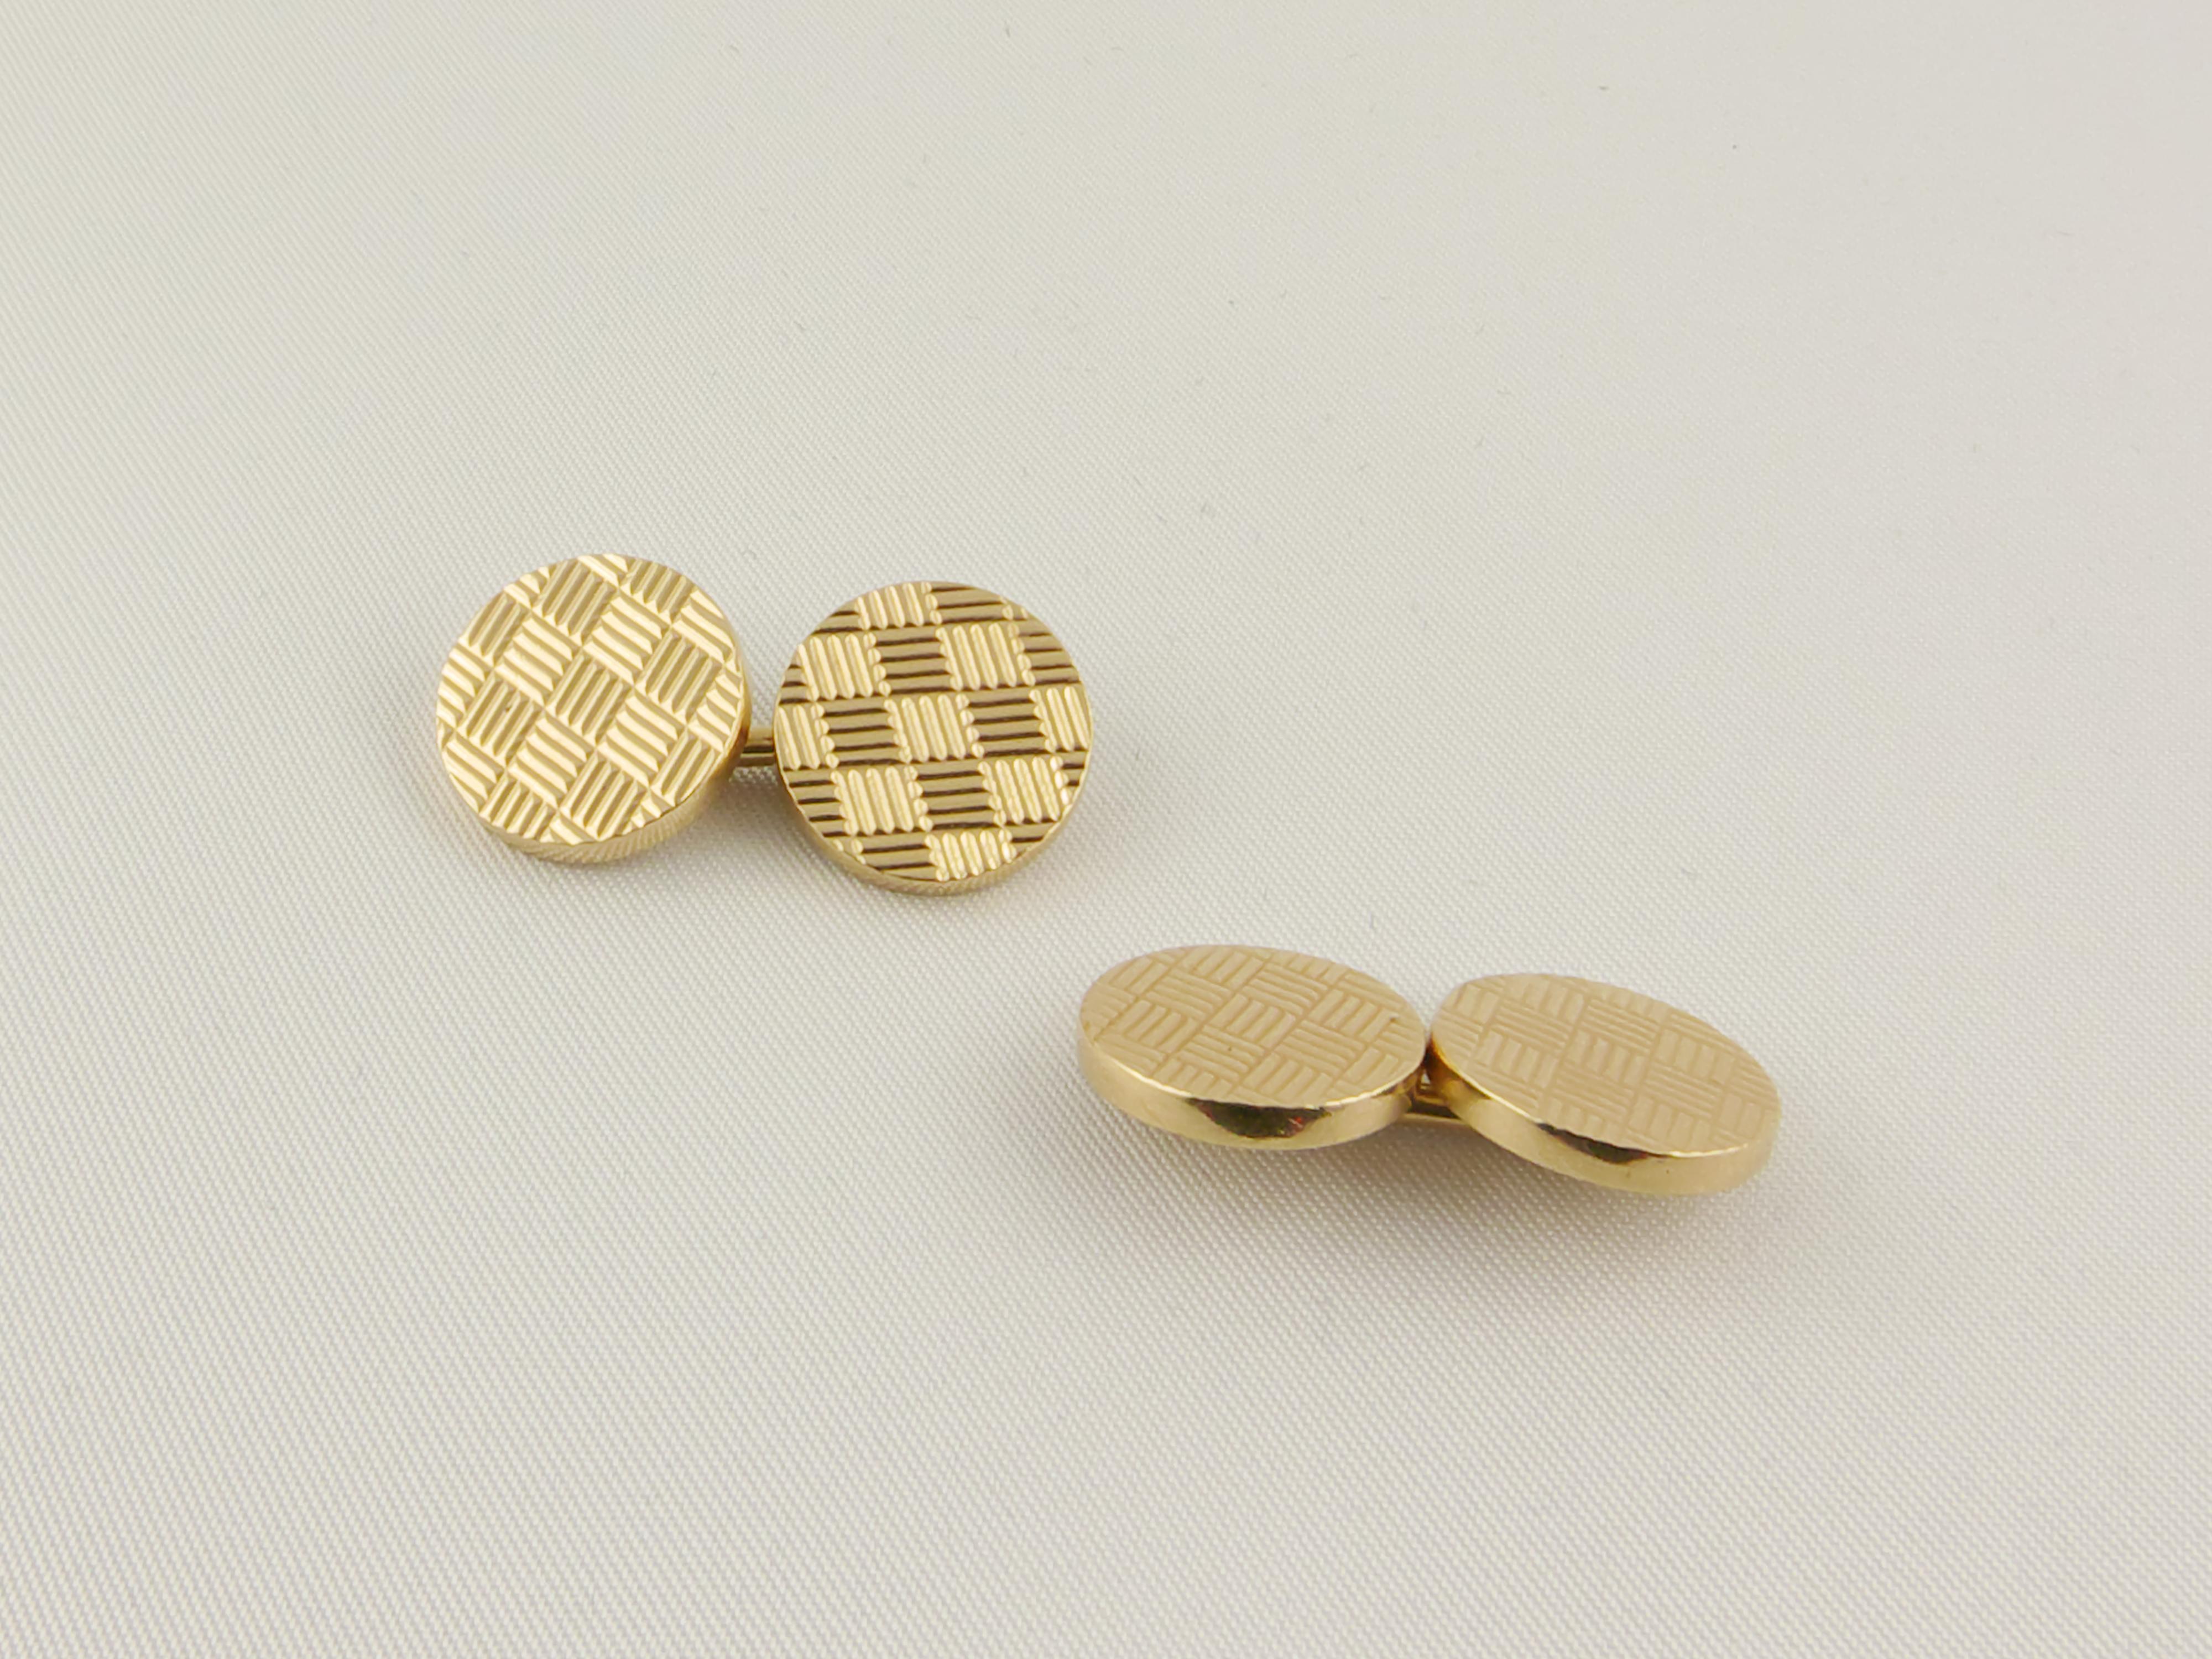 1960's Tiffany & Co. round Engraved Double-Sided Yellow Gold Cufflinks
For the sophisticated gentleman, these fabulous  Yellow Gold Cufflinks have a textured Geometric Checkerboard Design and are marked  TIFFANY & CO. They are solid and very chic 